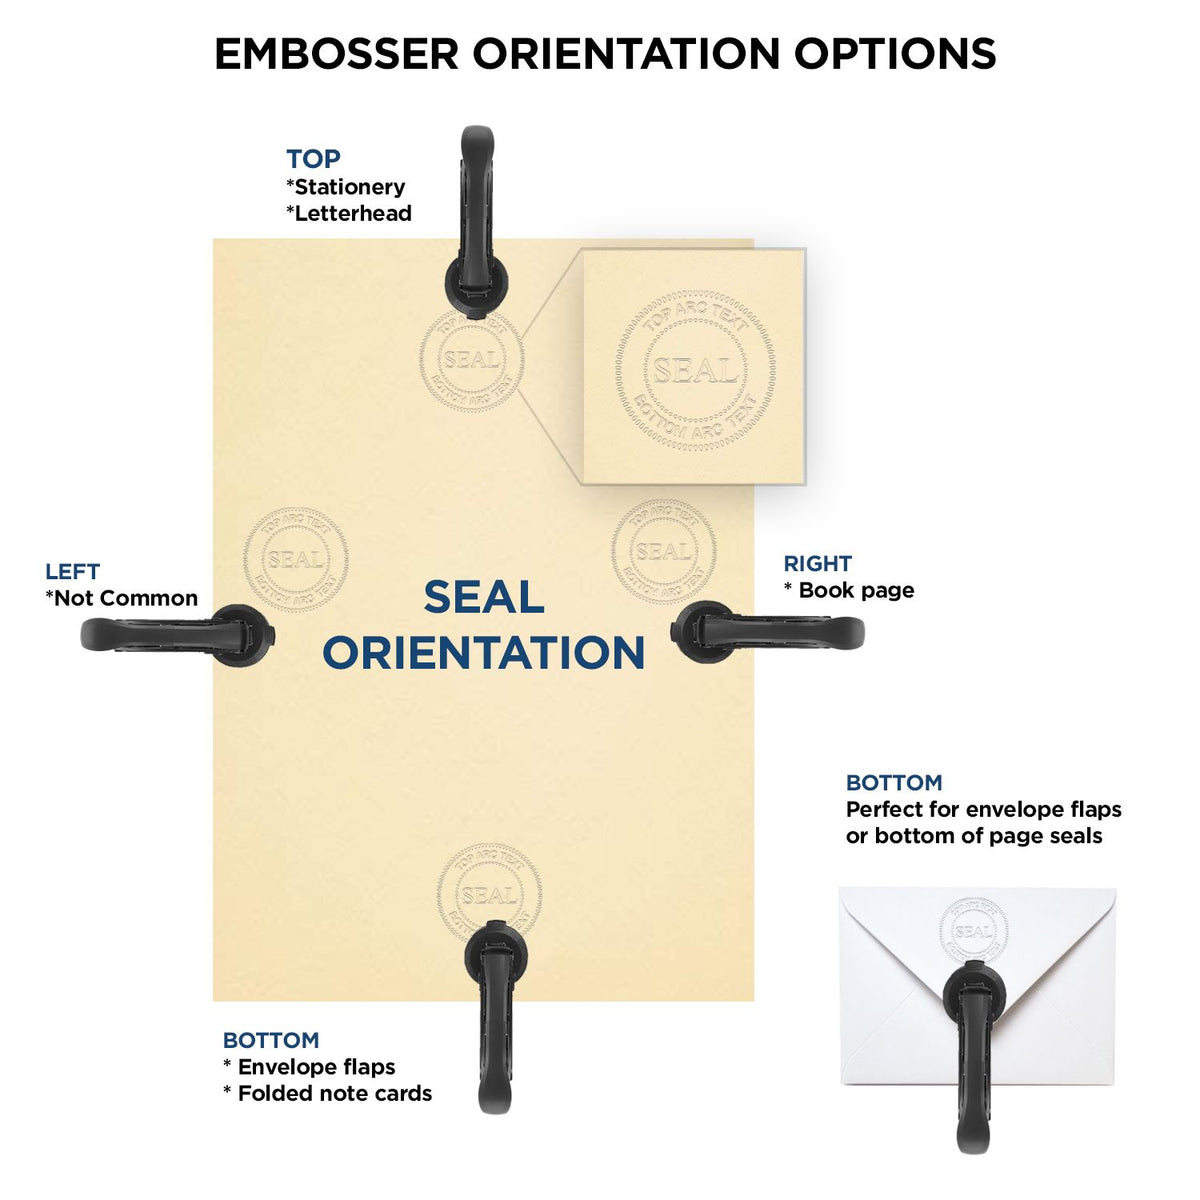 An infographic for the State of Indiana Extended Long Reach Engineer Seal showing embosser orientation, this is showing examples of a top, bottom, right and left insert.